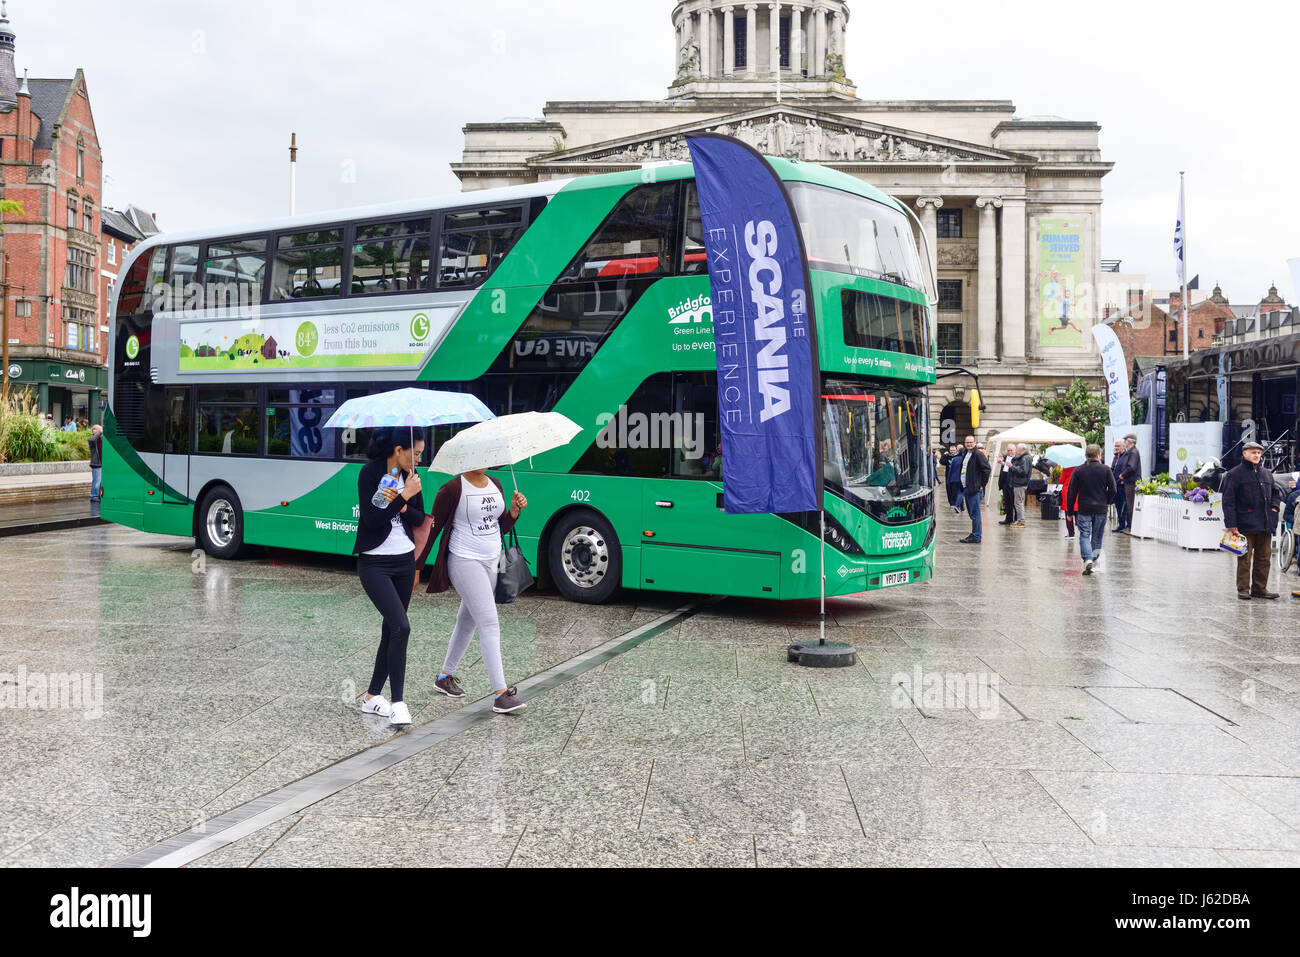 Nottingham, UK. 19th May 2017. Nottingham city transport display on the old market square the world's greenest fleet of biogas double-decker buses.They are due for public service this summer. Credit: Ian Francis/Alamy Live News Stock Photo